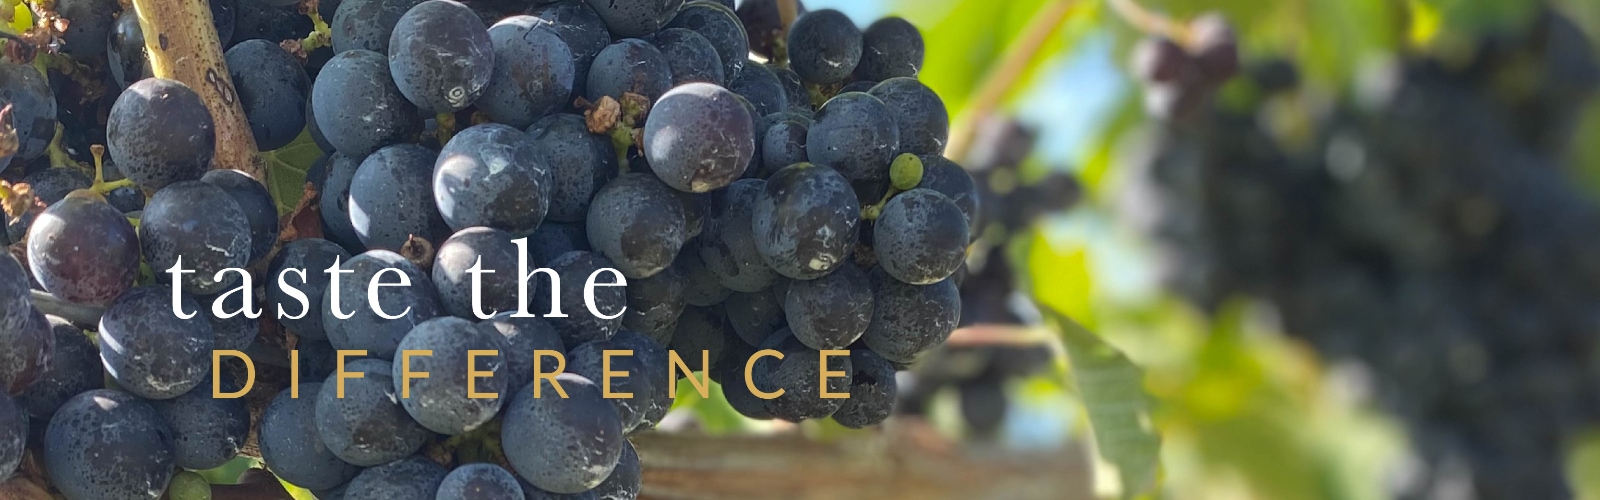 Taste The Difference Grapes on Vine image banner